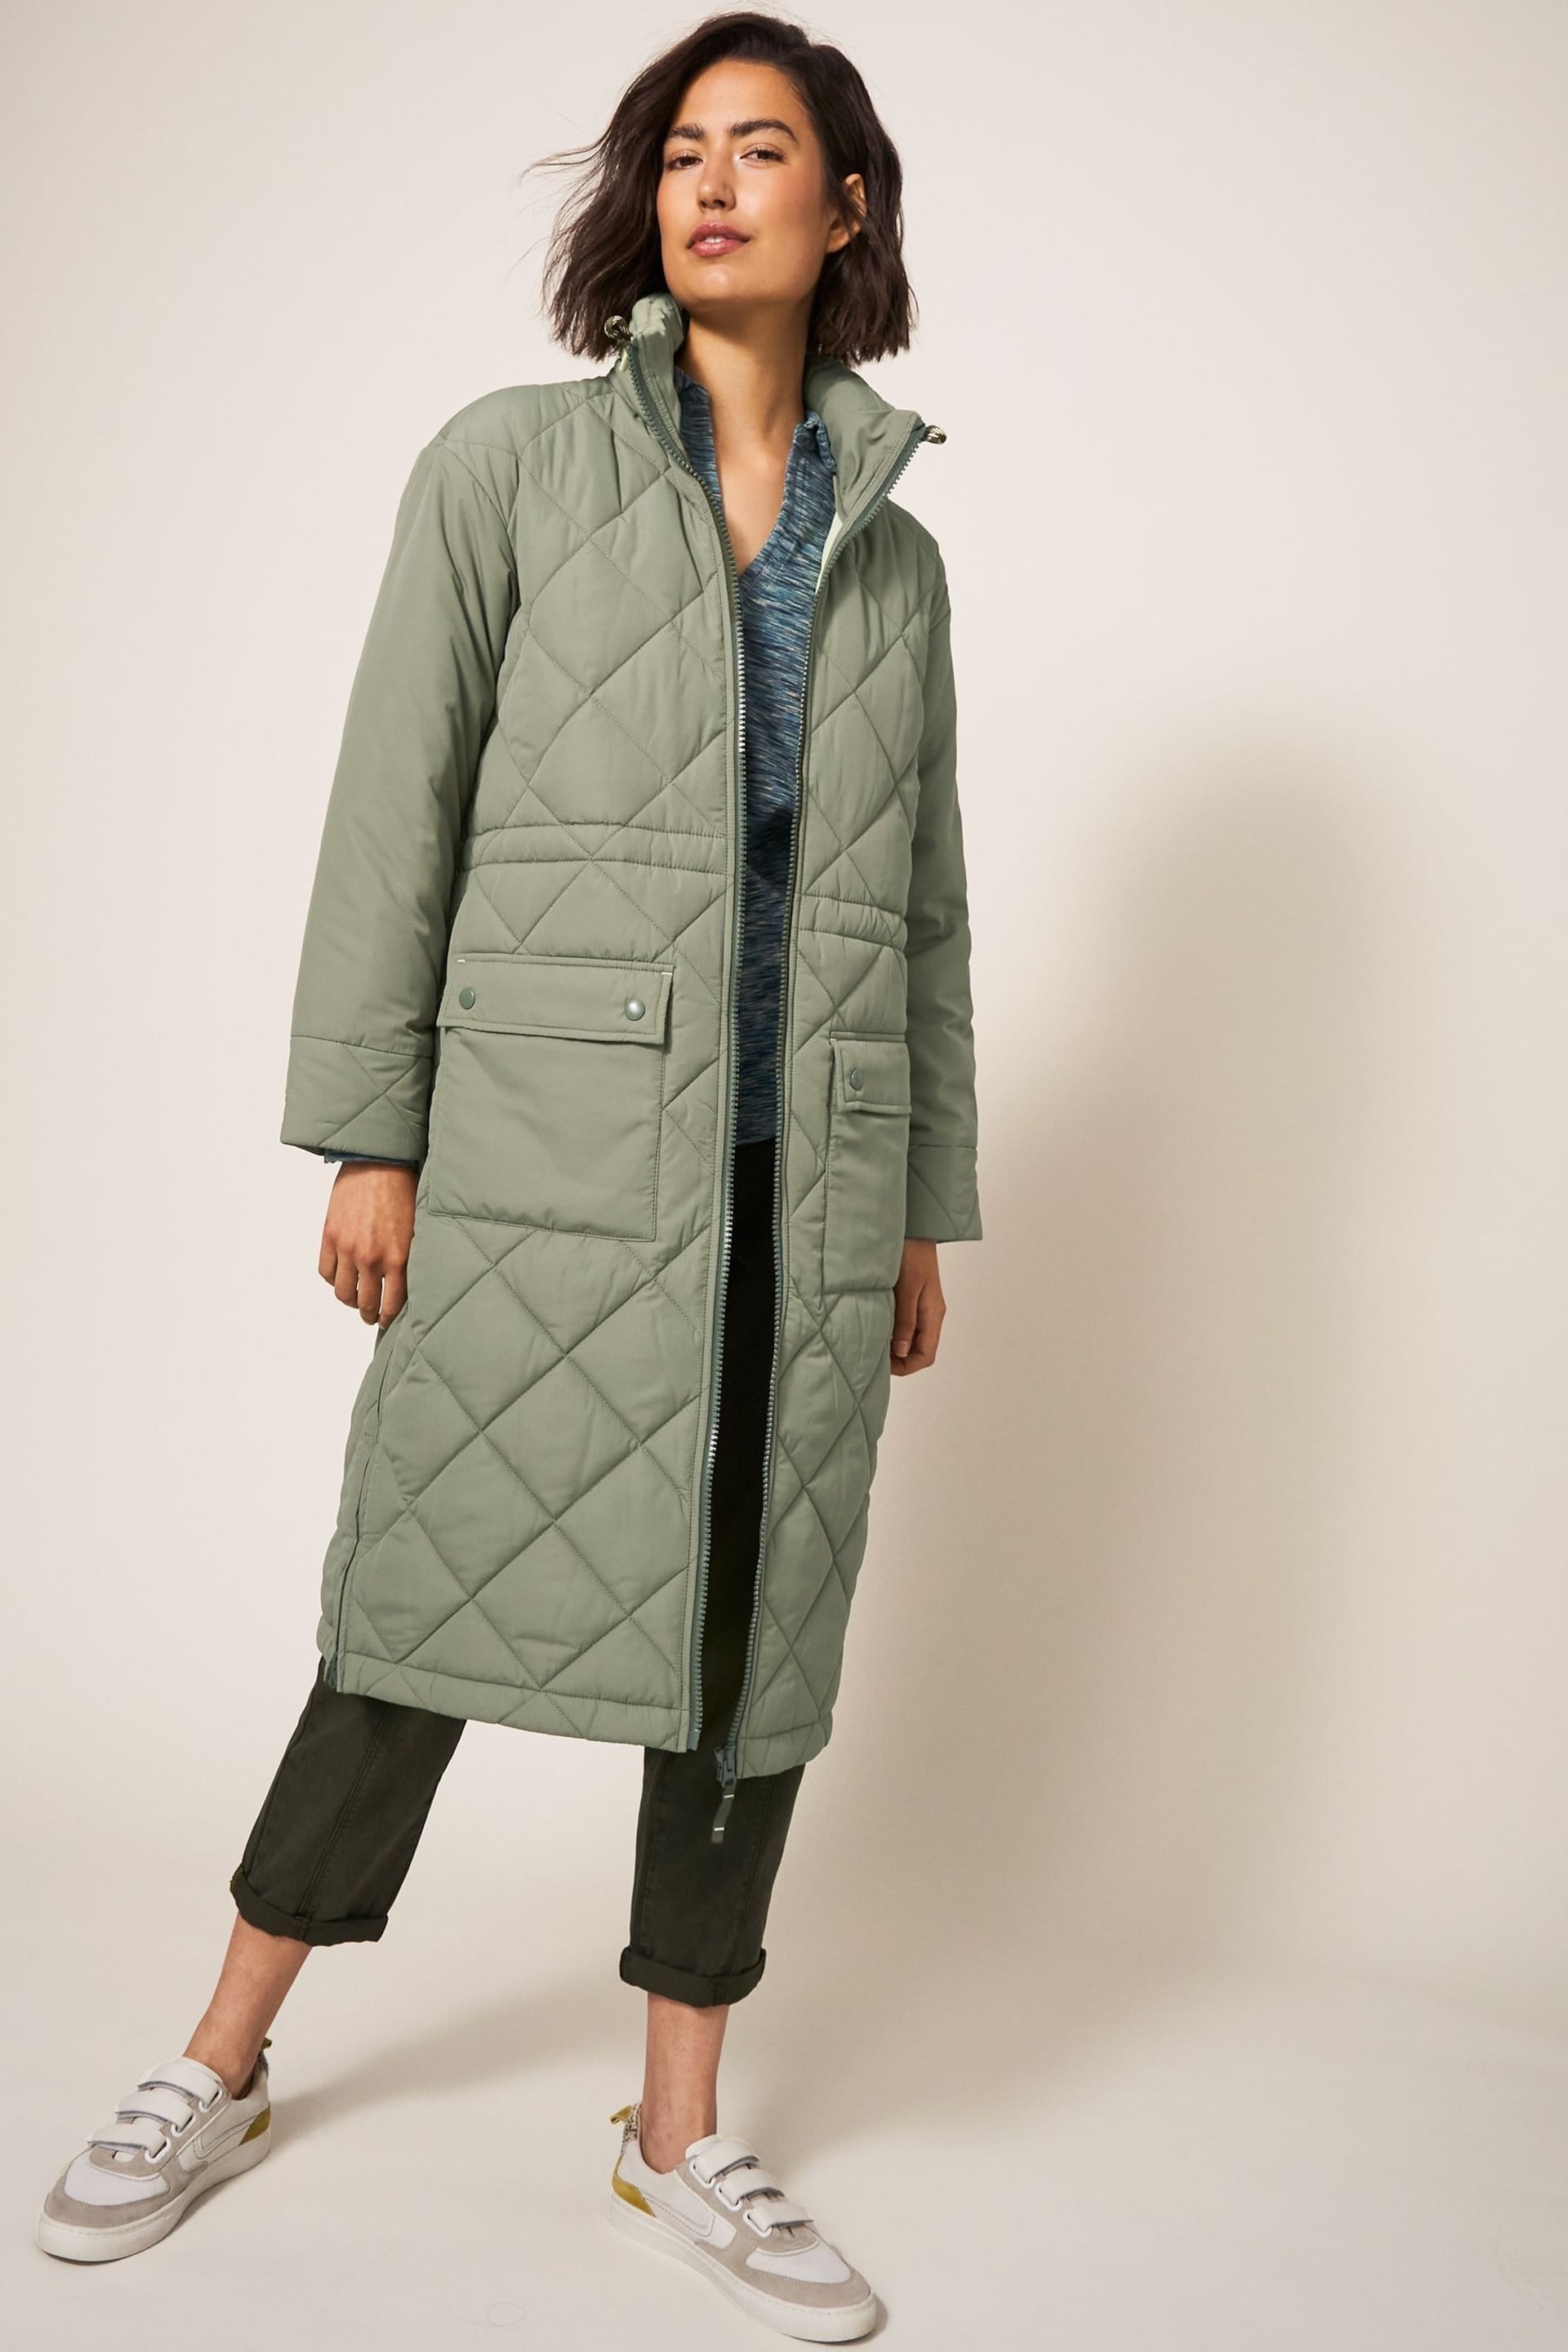 White Stuff Green Lorena Quilted Coat - Image 1 of 6